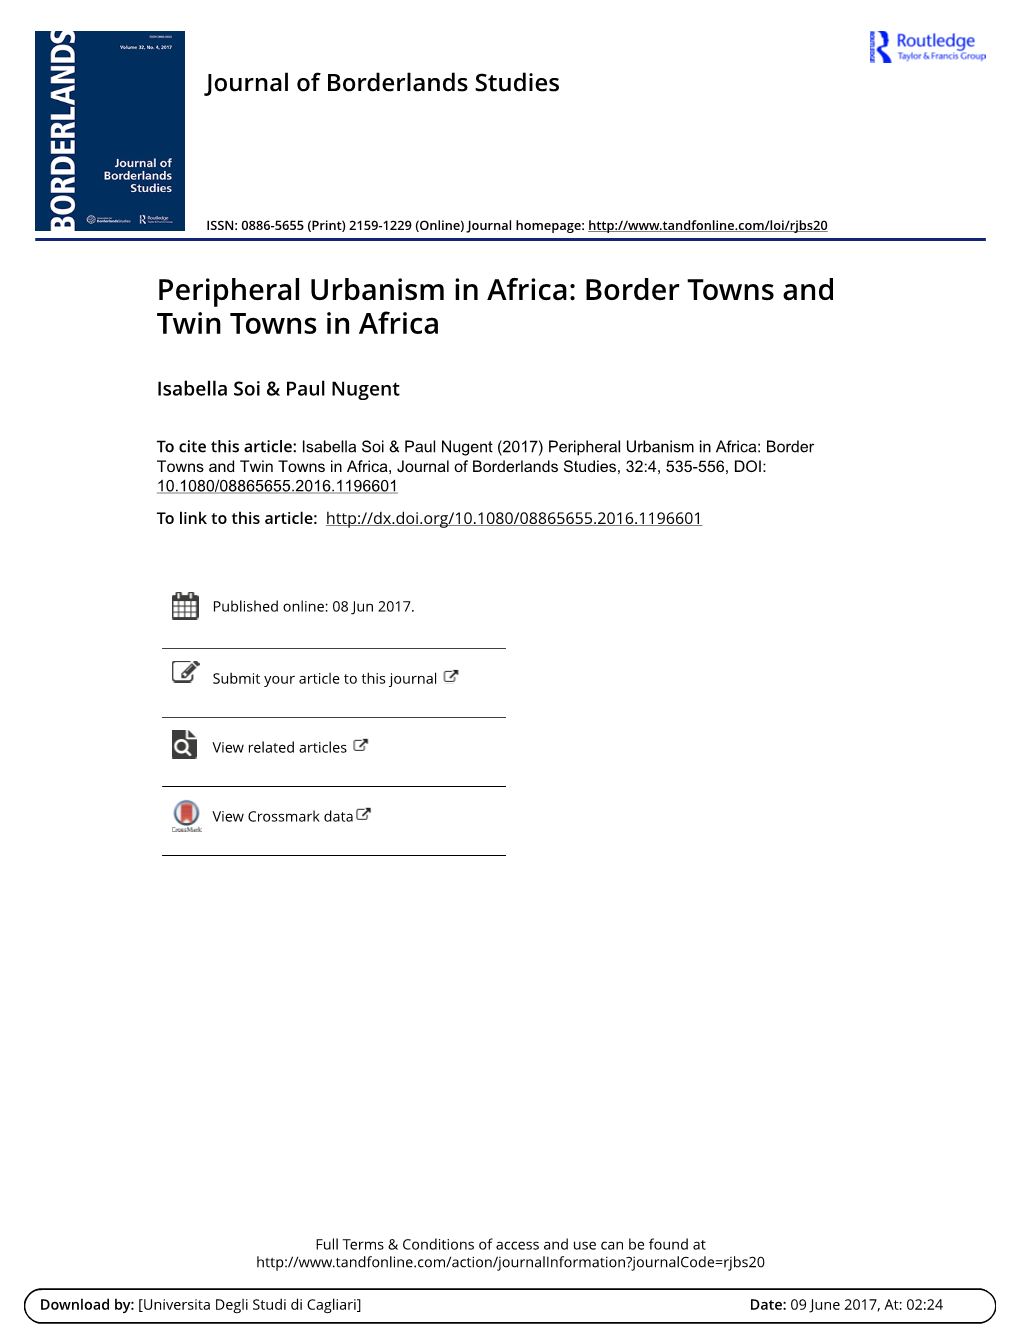 Peripheral Urbanism in Africa: Border Towns and Twin Towns in Africa